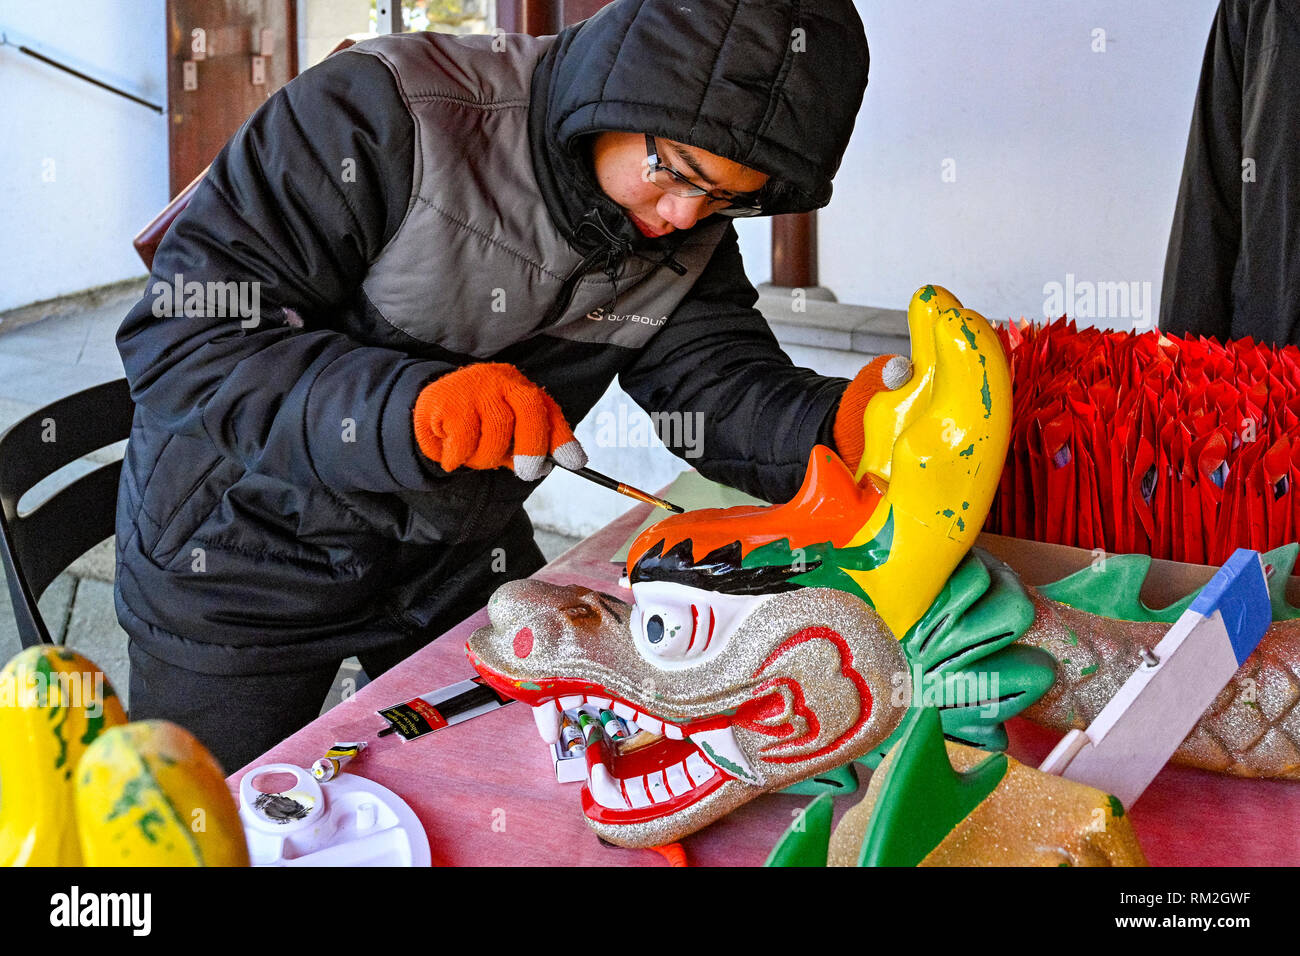 Young man painting Dragon Boat figurehead, Dr Sun Yat Sen Park and Classical Chinese Garden, Vancouver, British Columbia, Canada Stock Photo